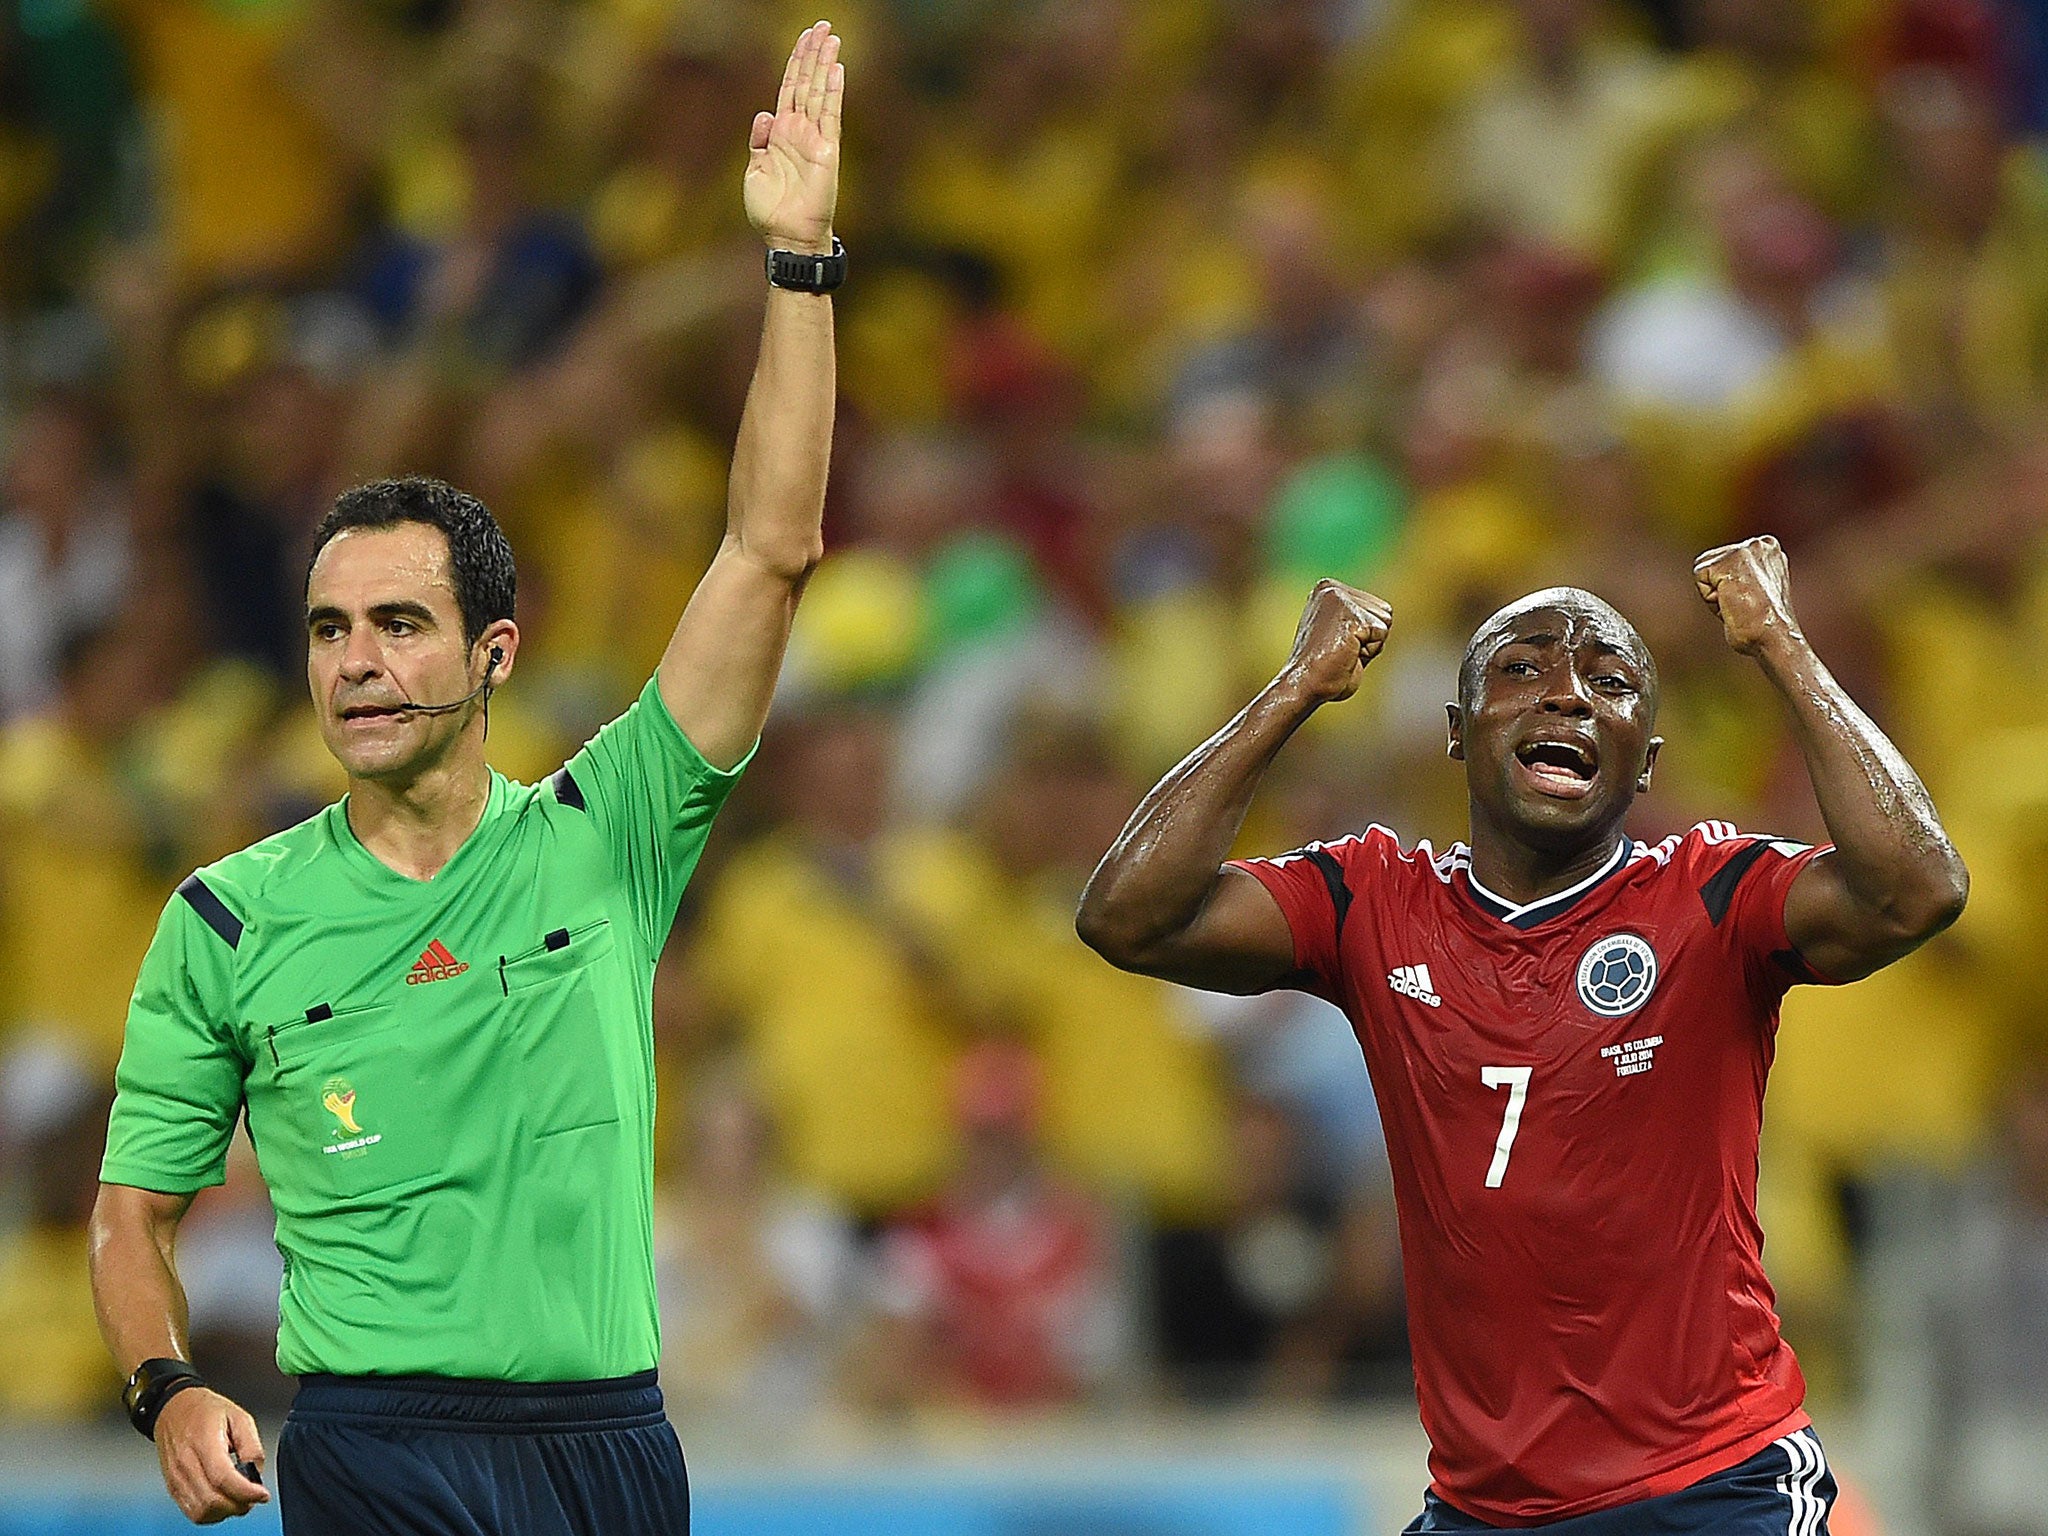 Colombia defender Pablo Armero shows his anguish as referee Carlos Velasco Carballo again resists the urge to book a Brazil player